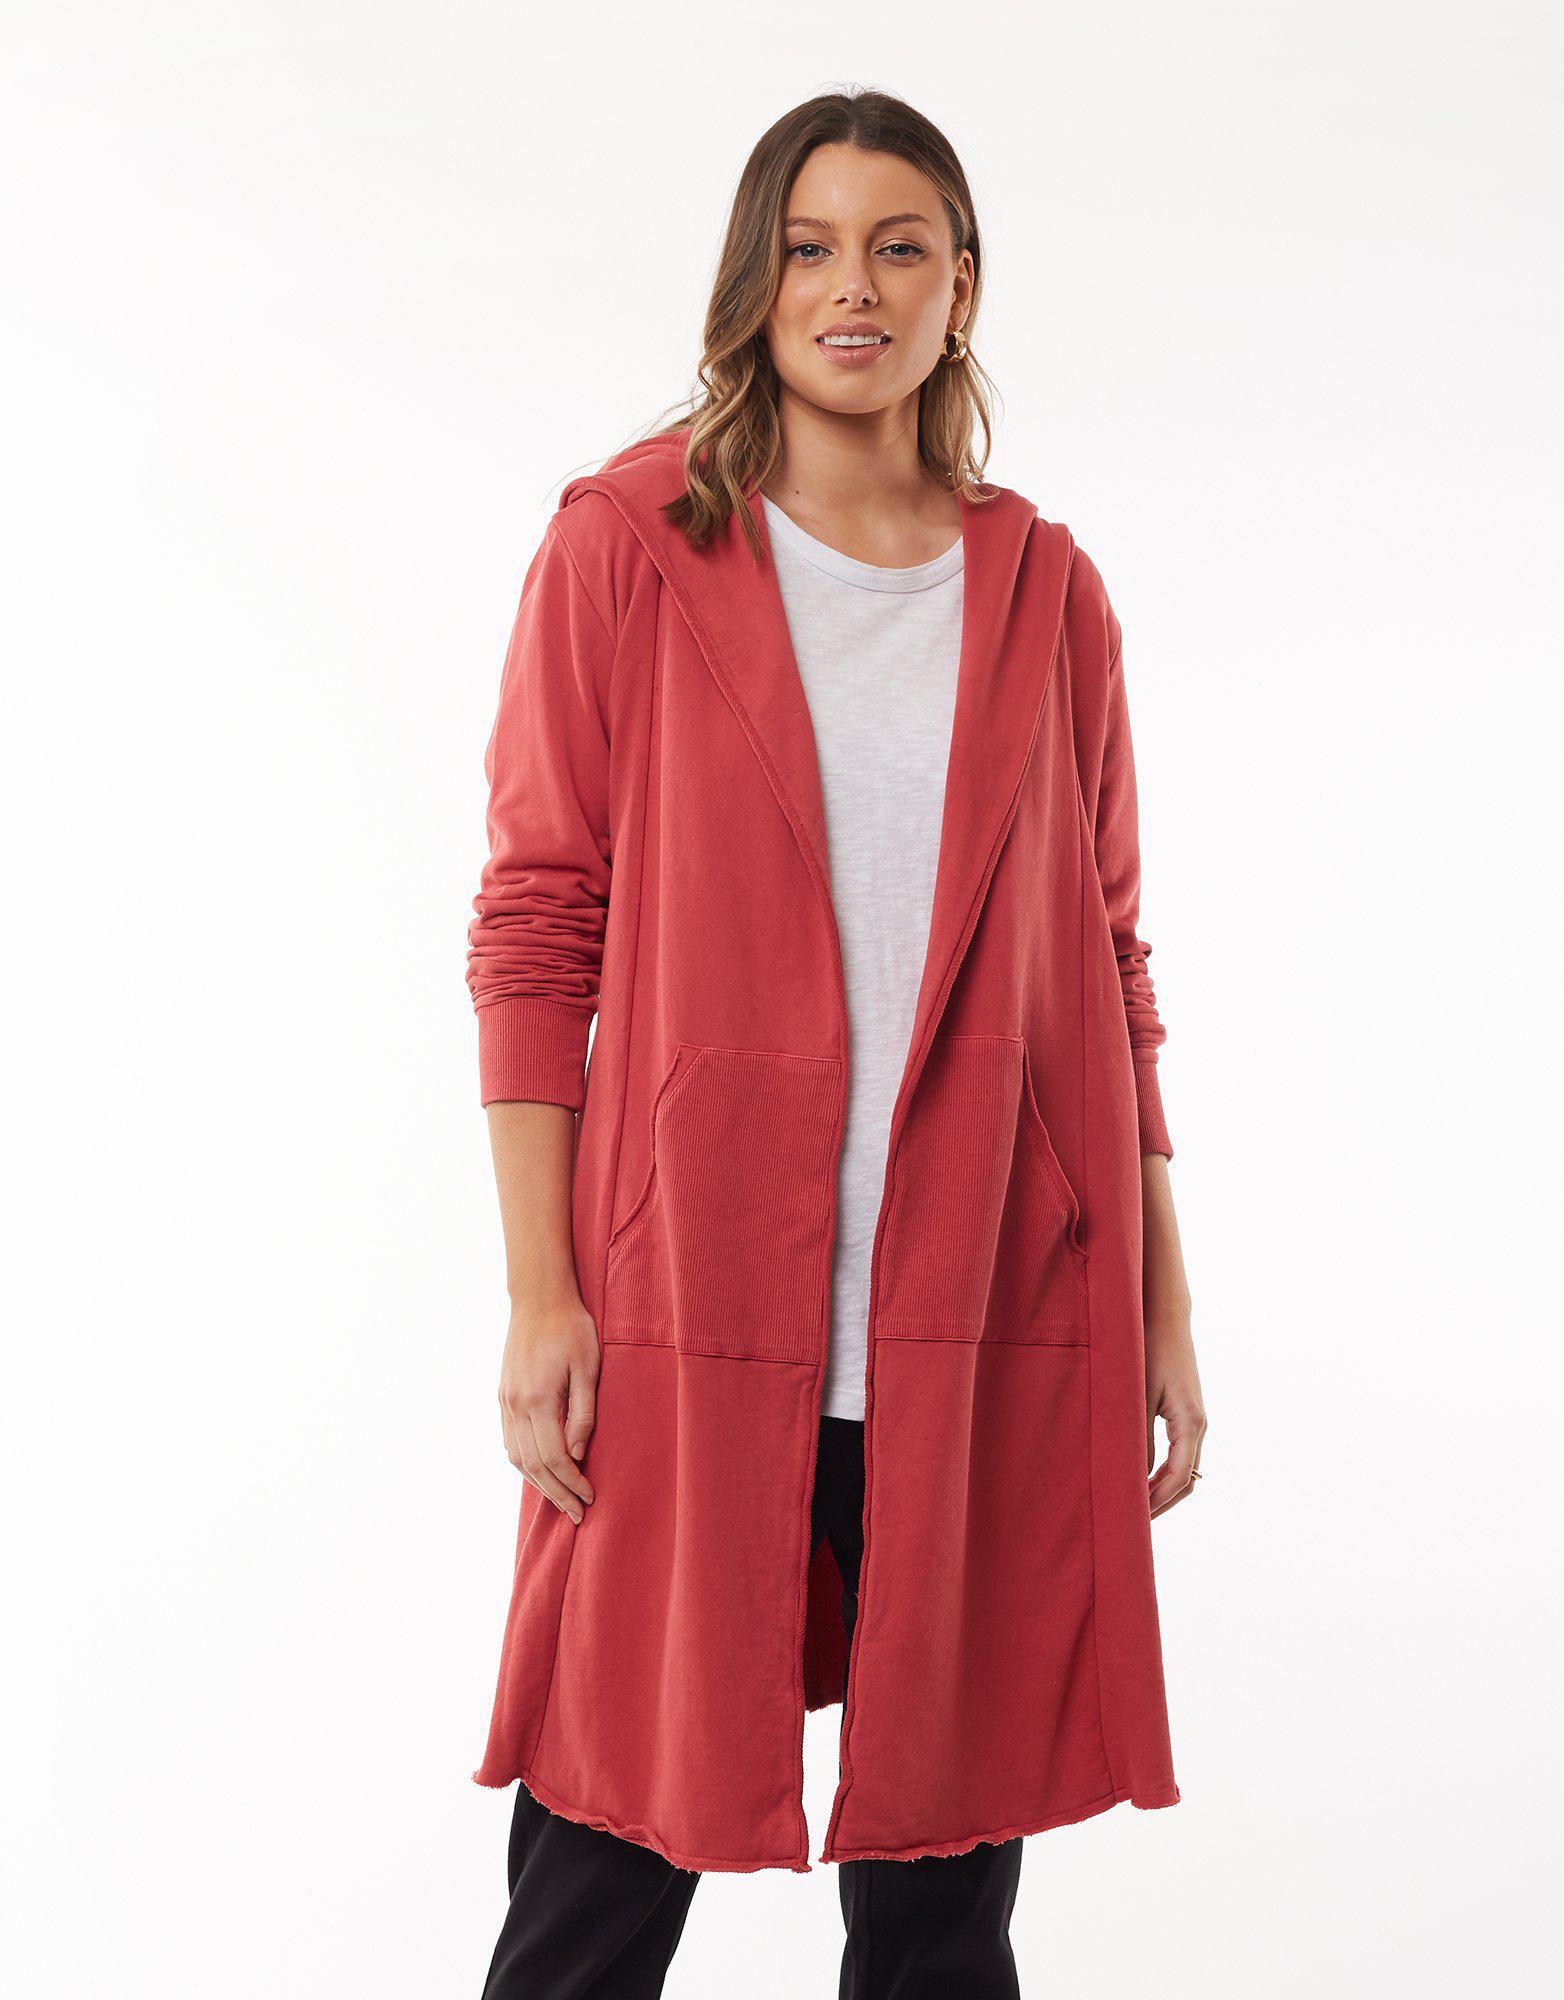 Naomi Hooded Cardi - Red - Foxwood - FUDGE Gifts Home Lifestyle